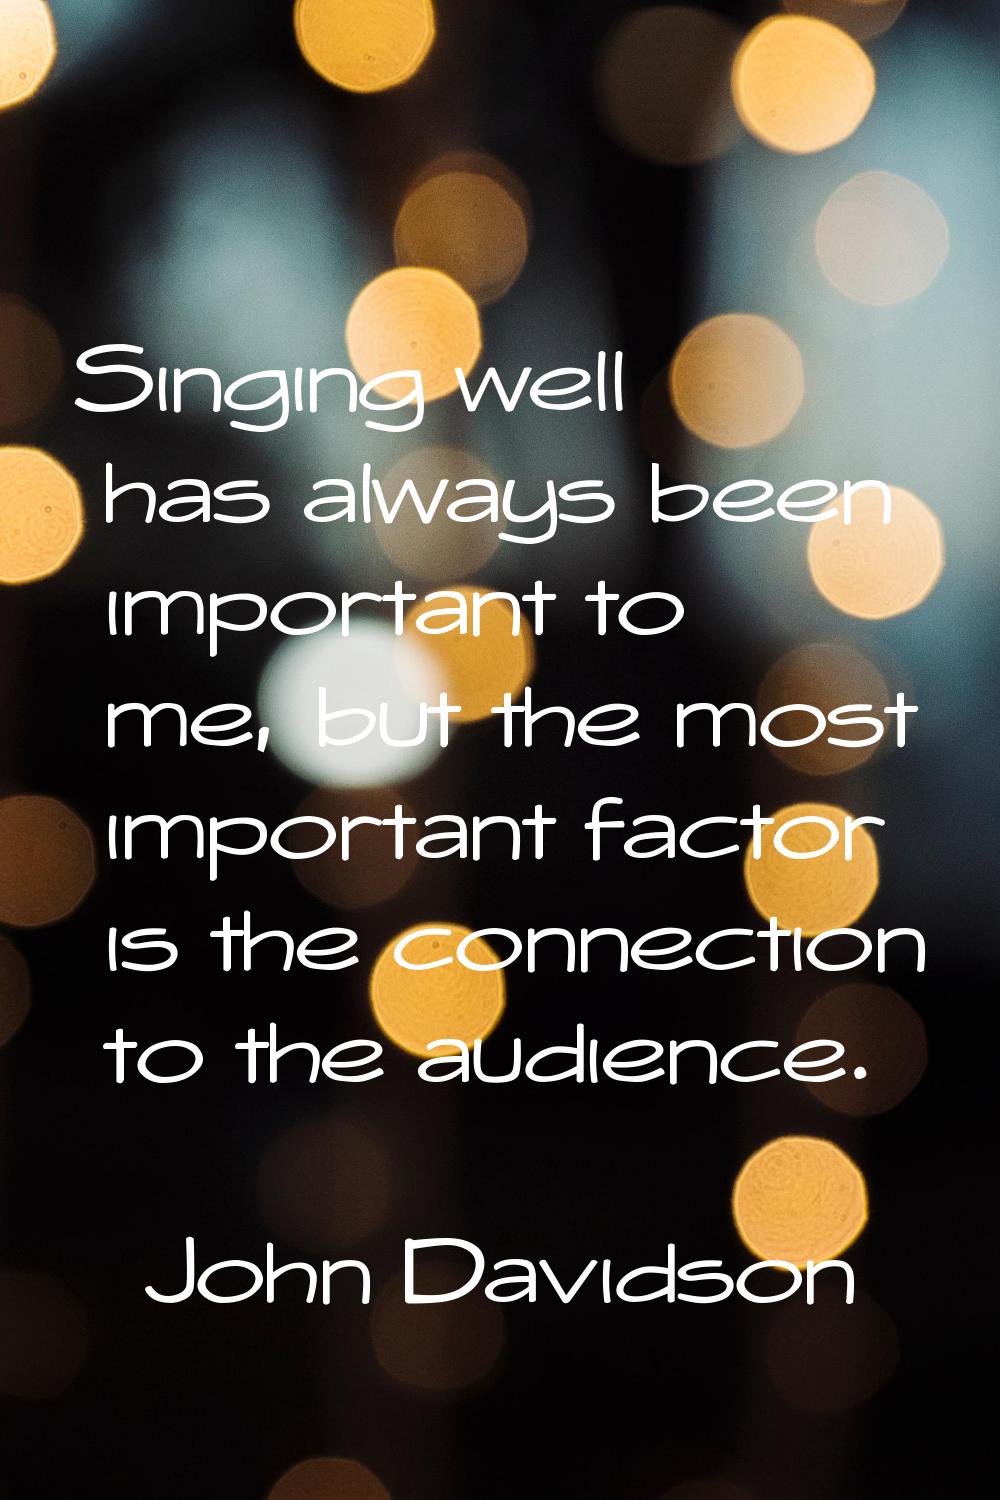 Singing well has always been important to me, but the most important factor is the connection to th